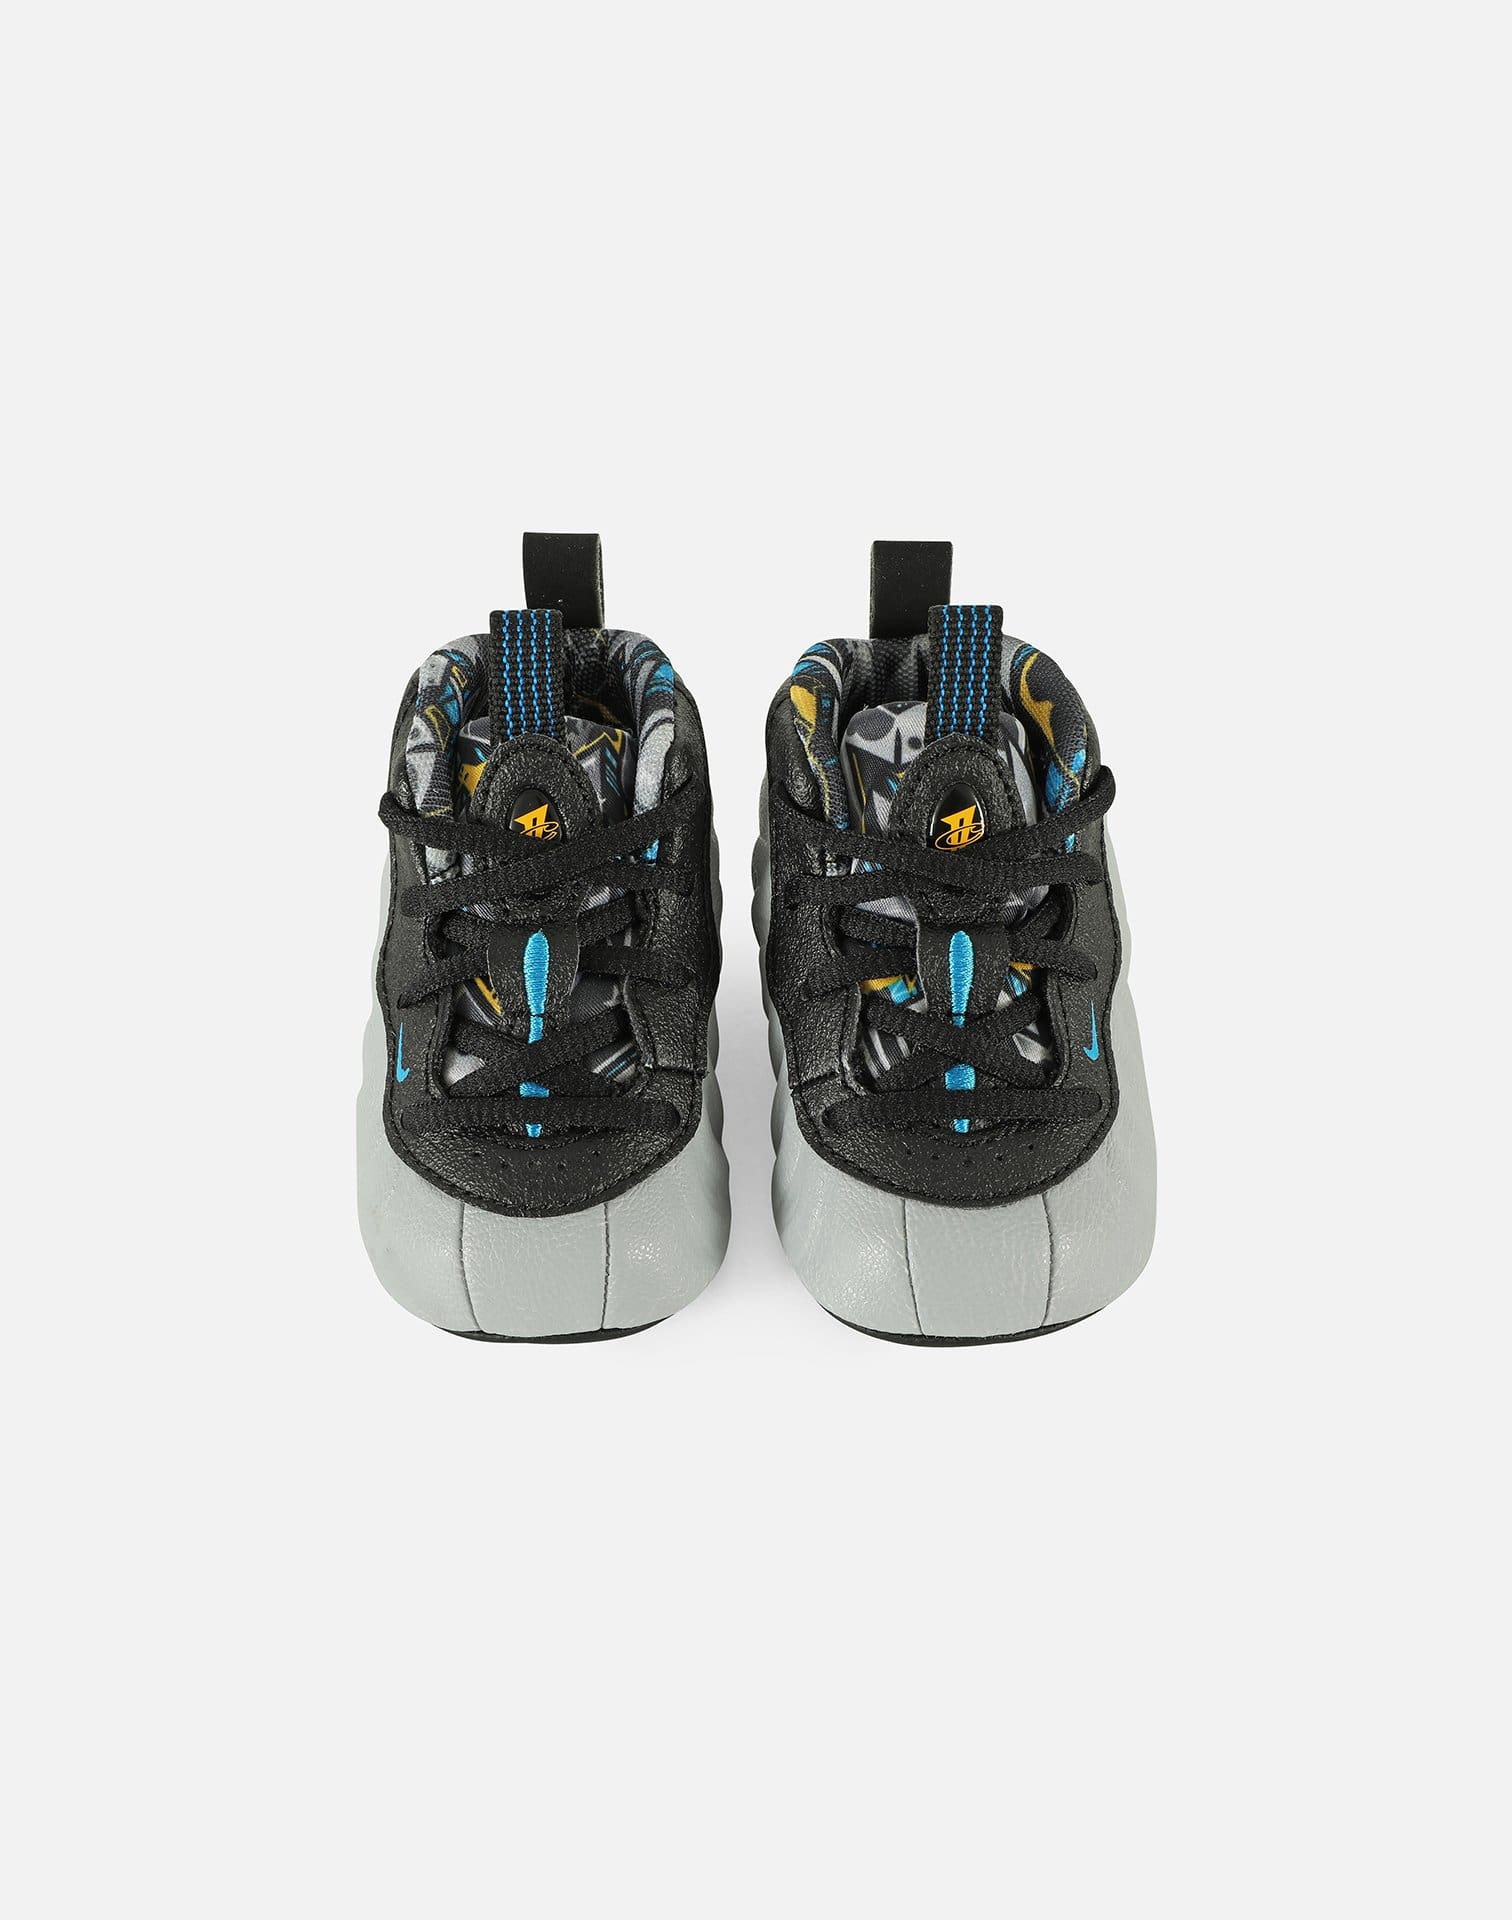 Nike LIL' POSITE ONE CRIB BOOTIE